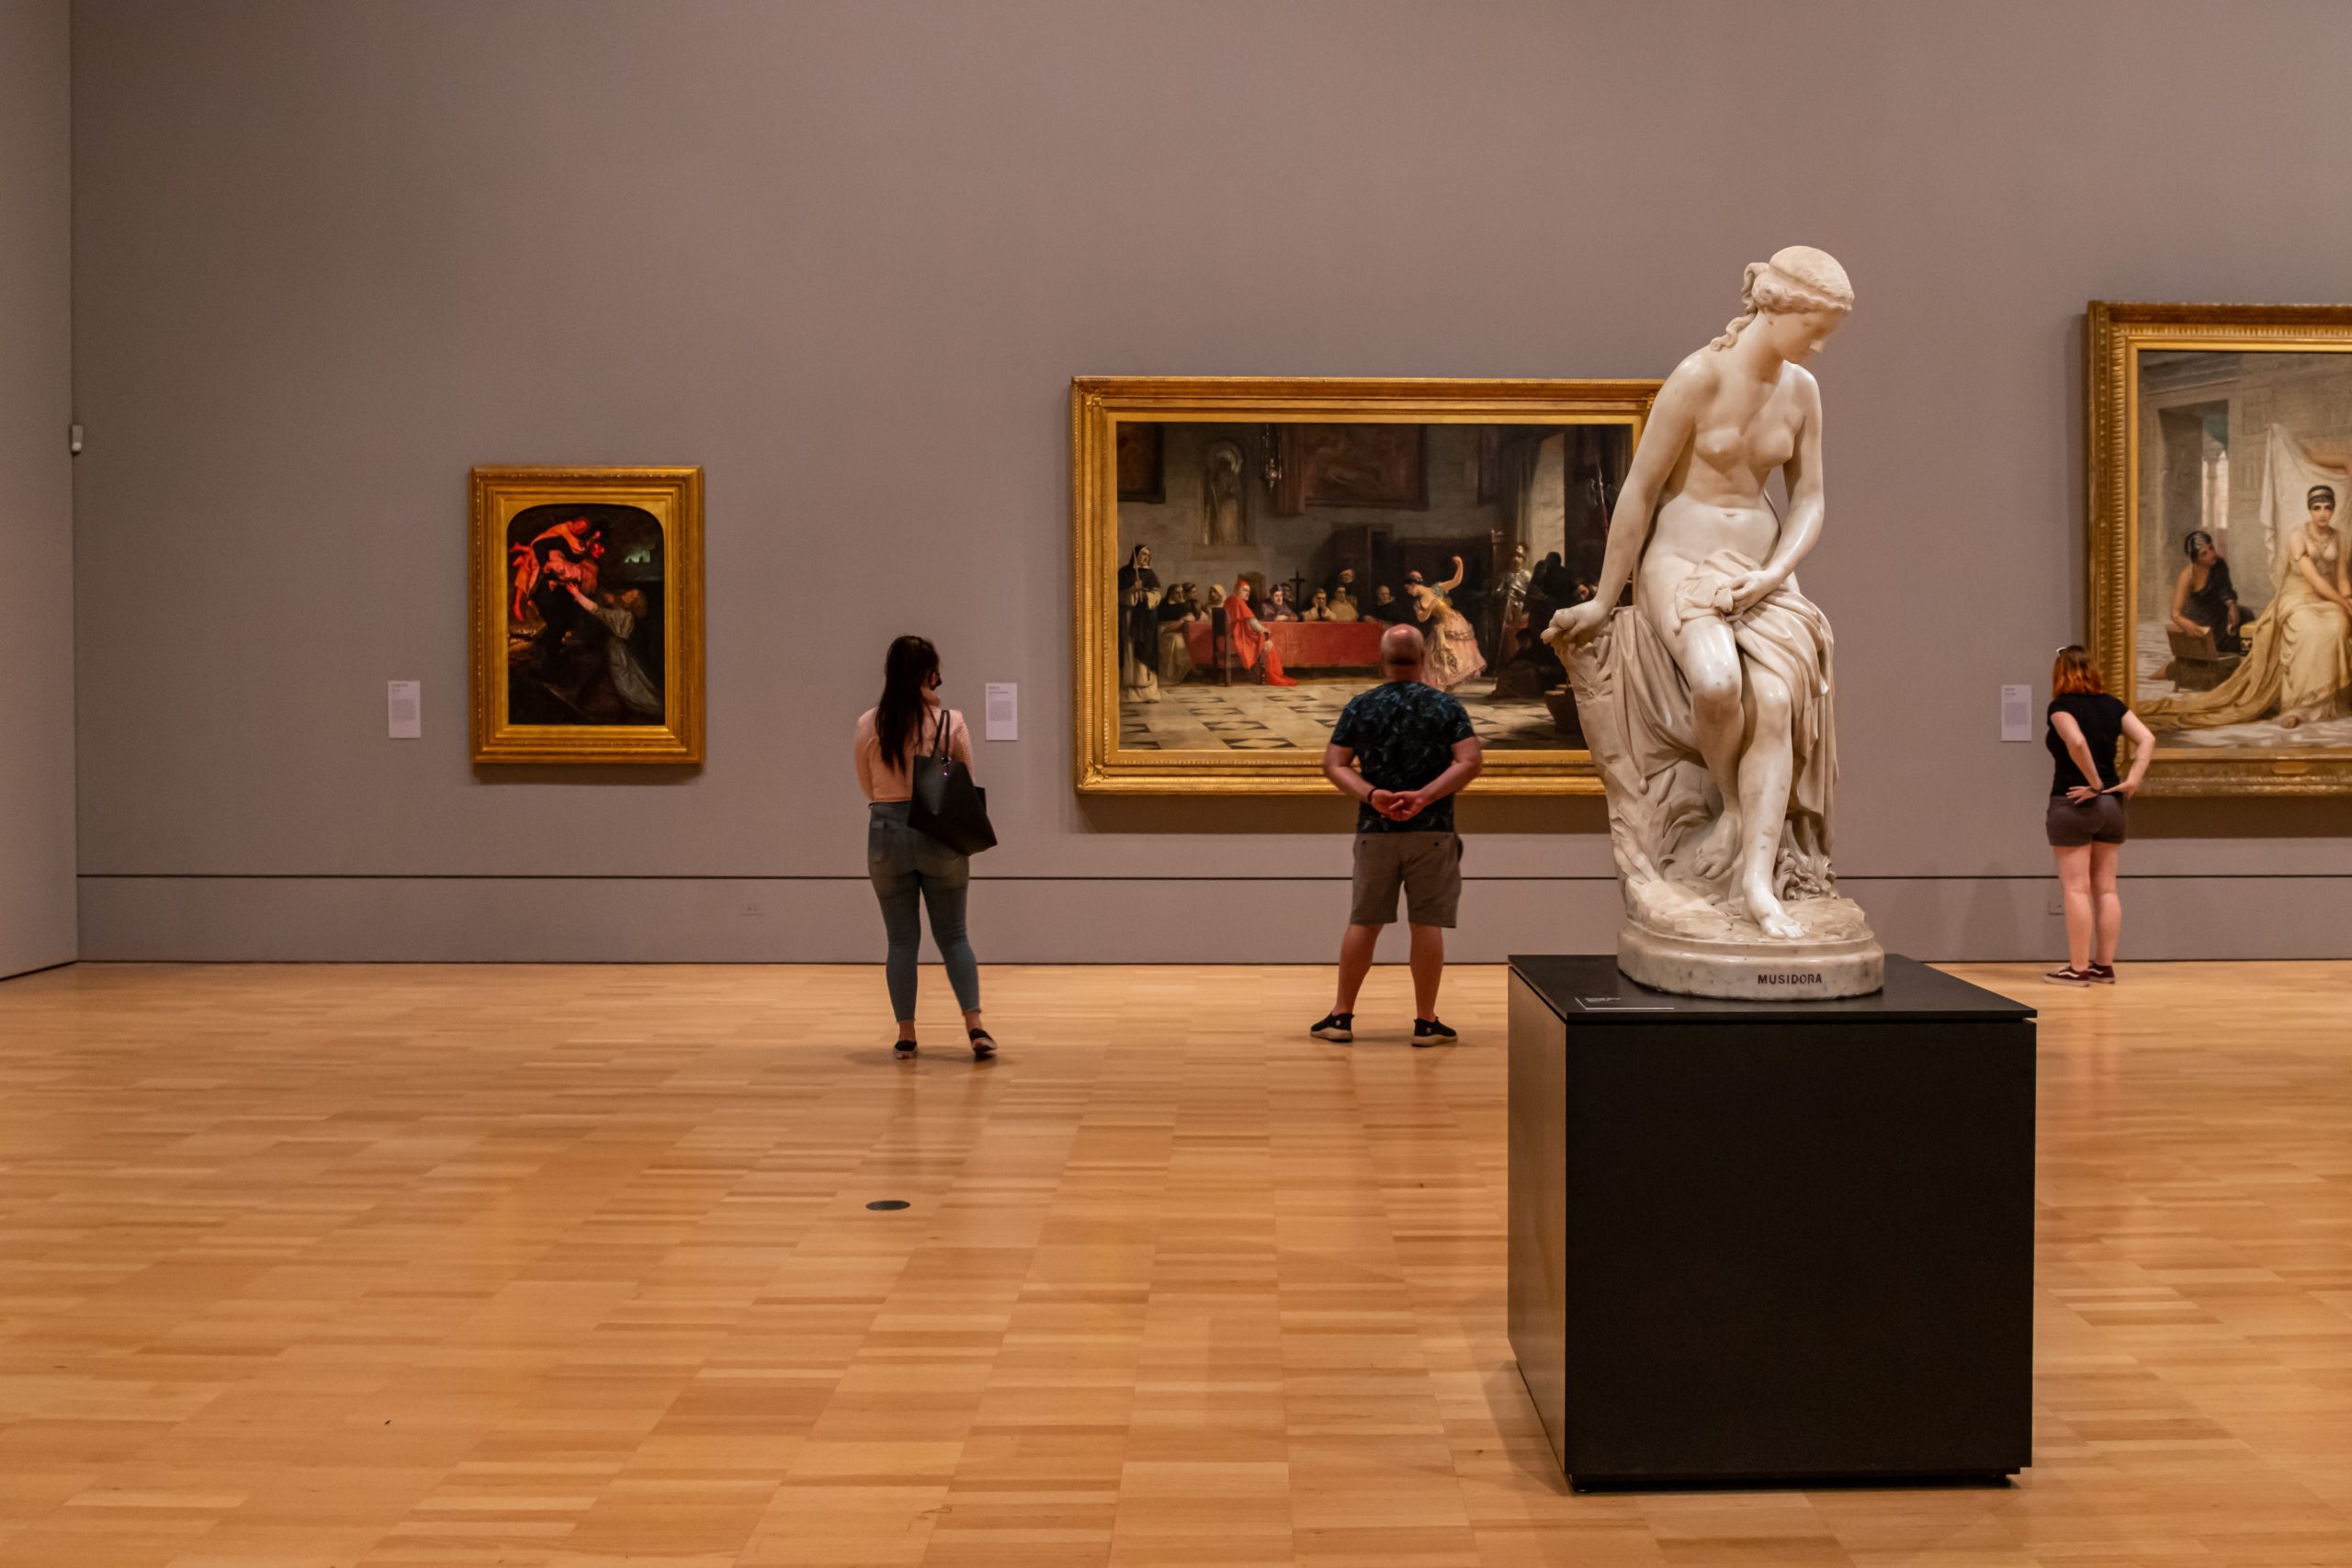 Visit the National Gallery of Victoria